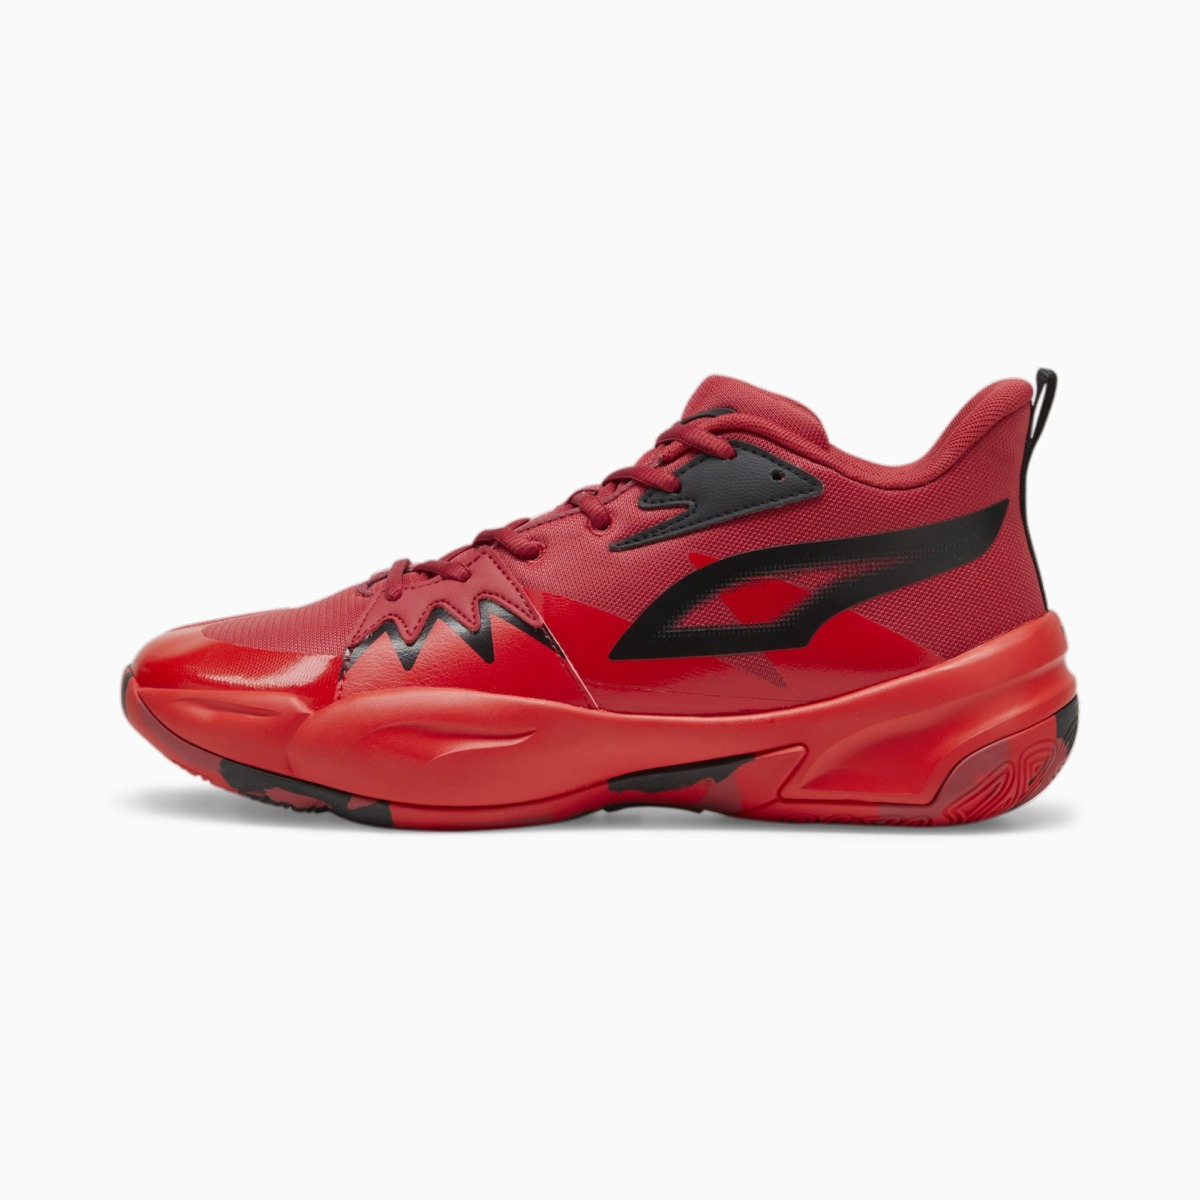 Basketball Shoes in Red for Woman at Puma GOOFASH